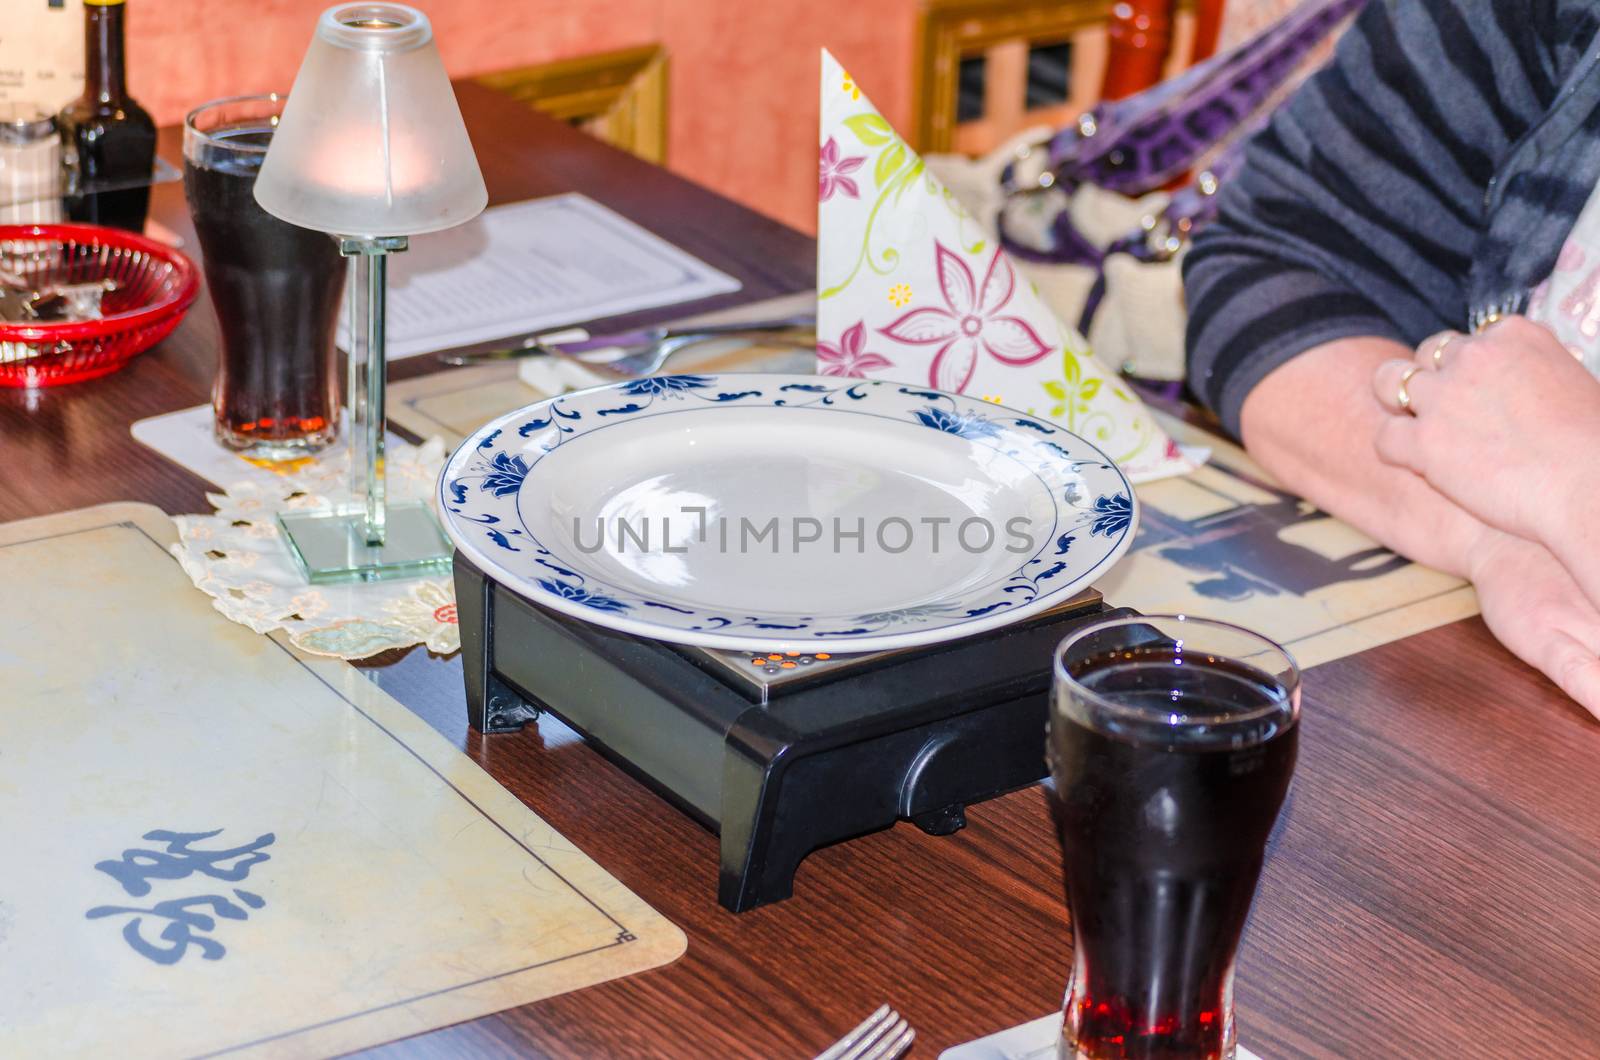 Chinese food, table decorations, plates with hot plate, candle and drinks.